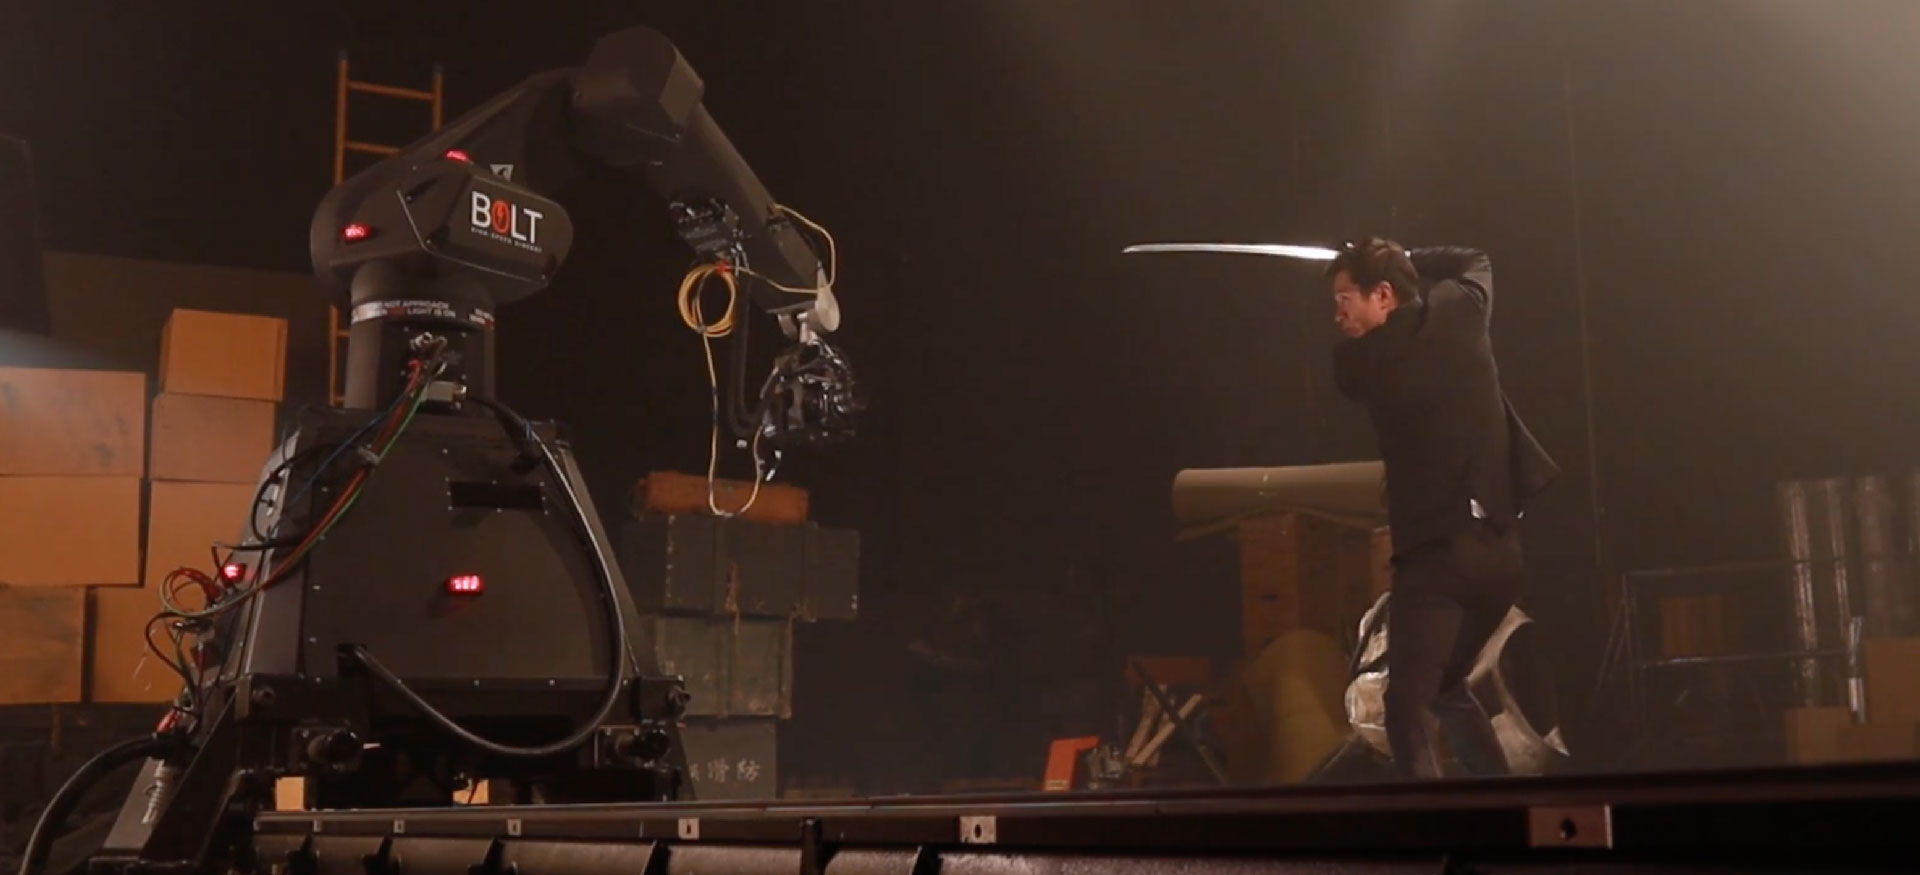 Samurai Sword Fights With Cinebot rig | Mark Roberts Motion Control